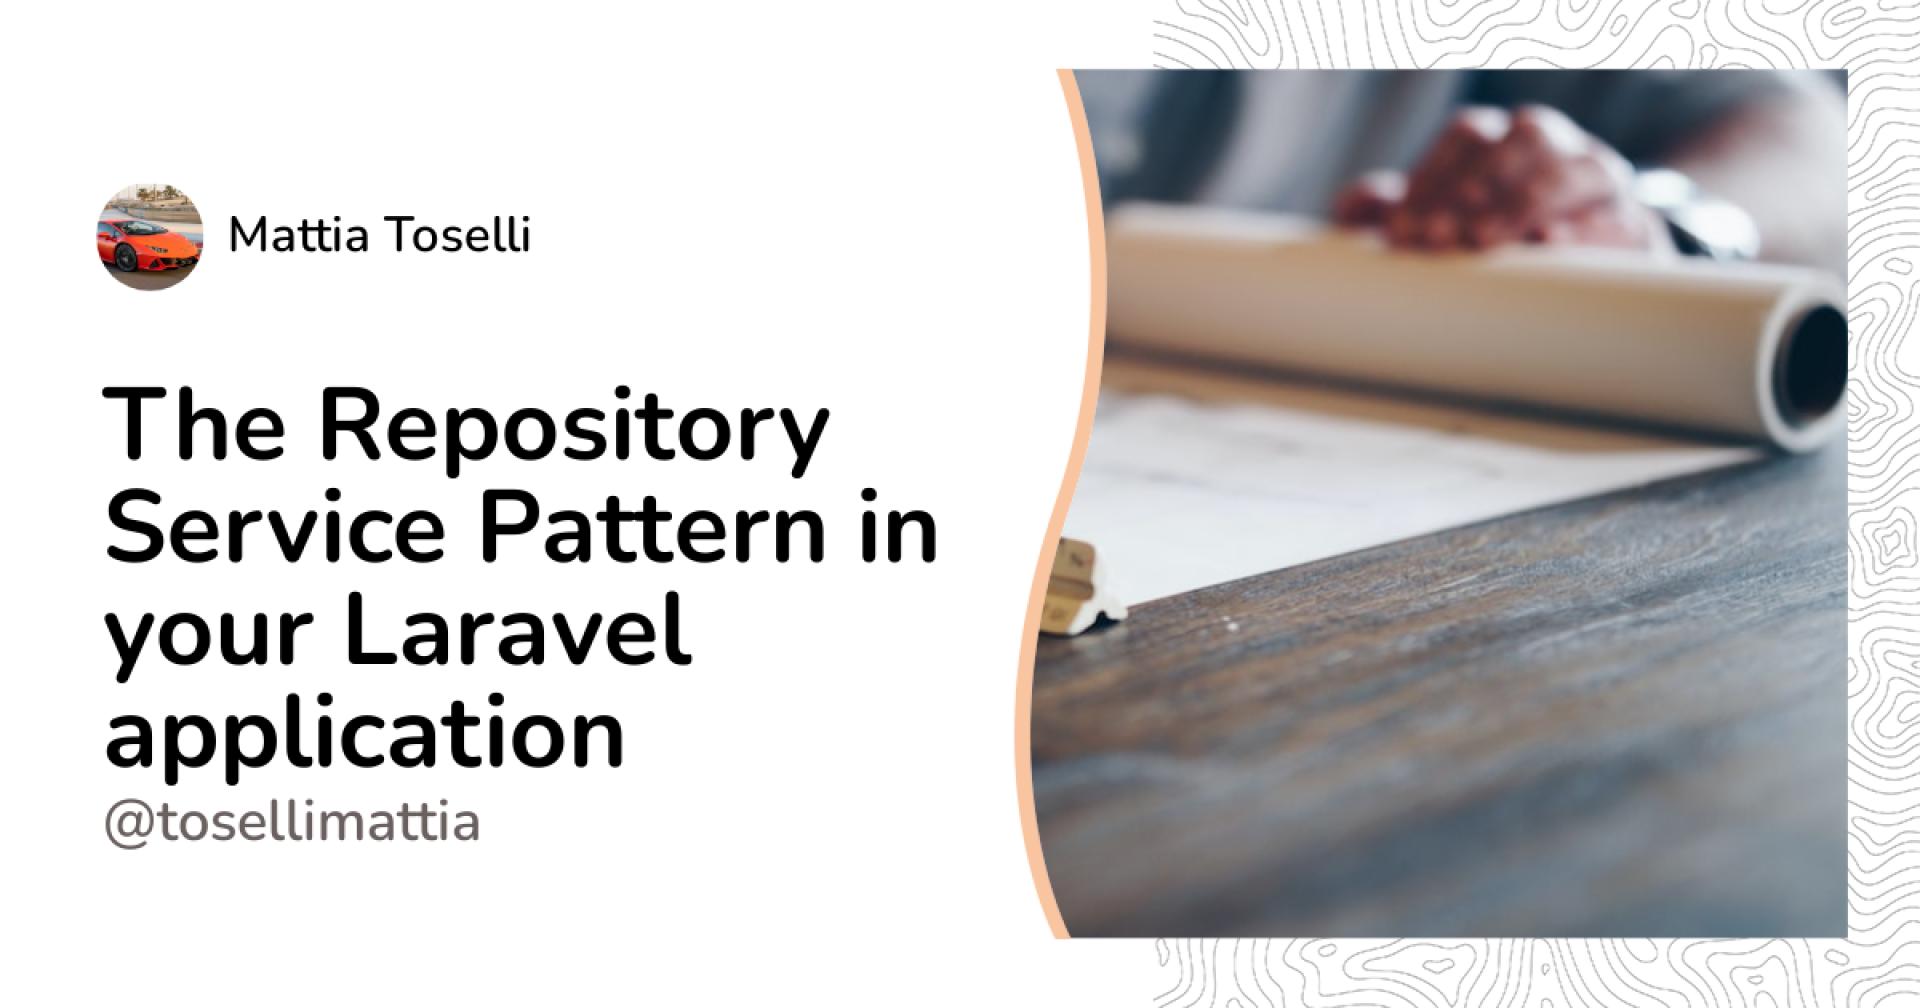 The Repository Service Pattern in your Laravel application